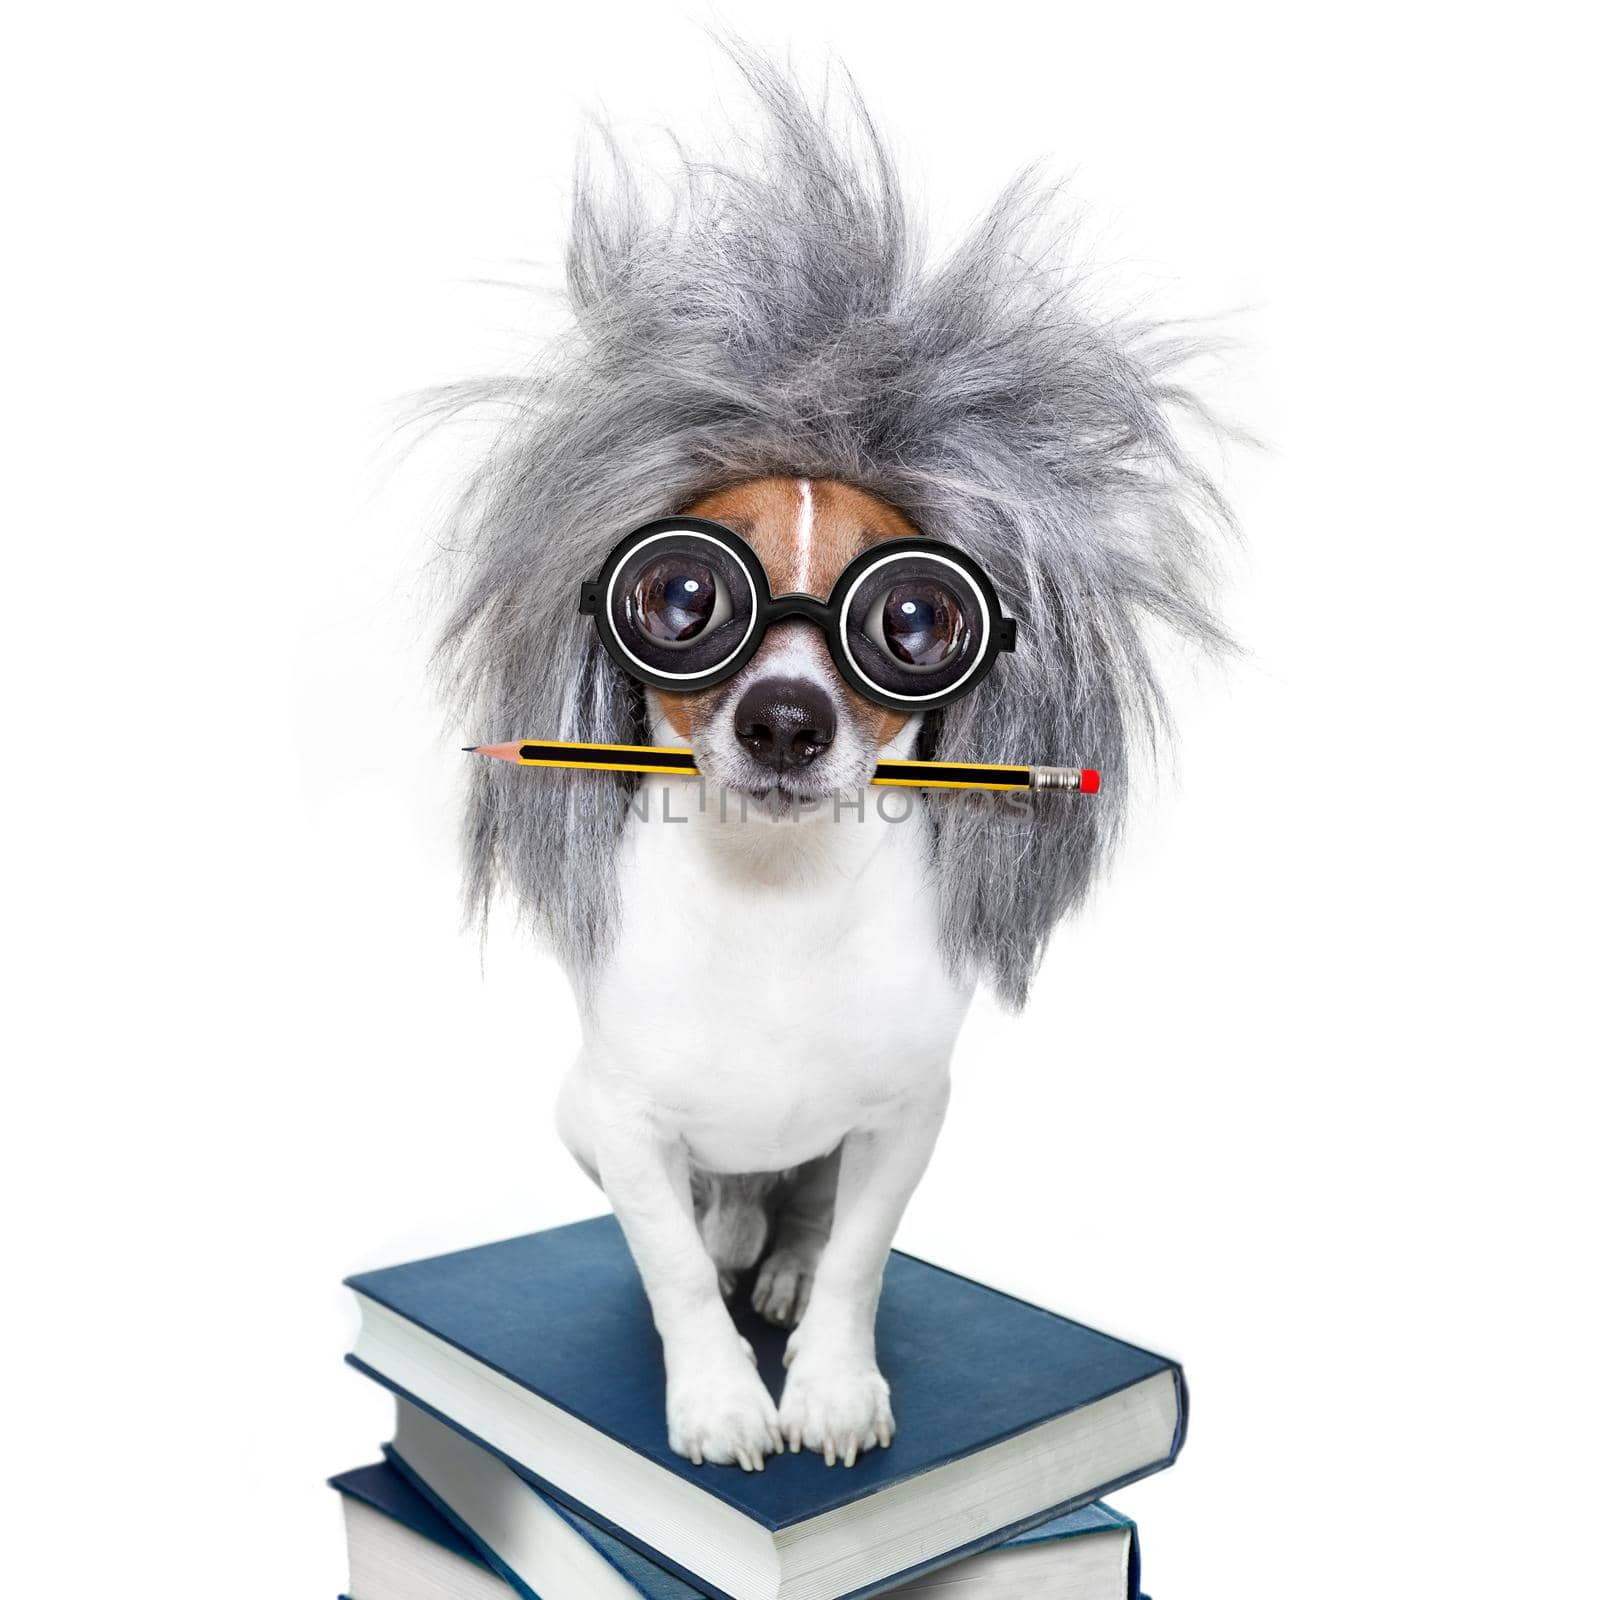 smart and intelligent jack russell dog with nerd glasses  wearing a grey hair wig on a book stack with pen or pencil in mouth  , isolated on white background